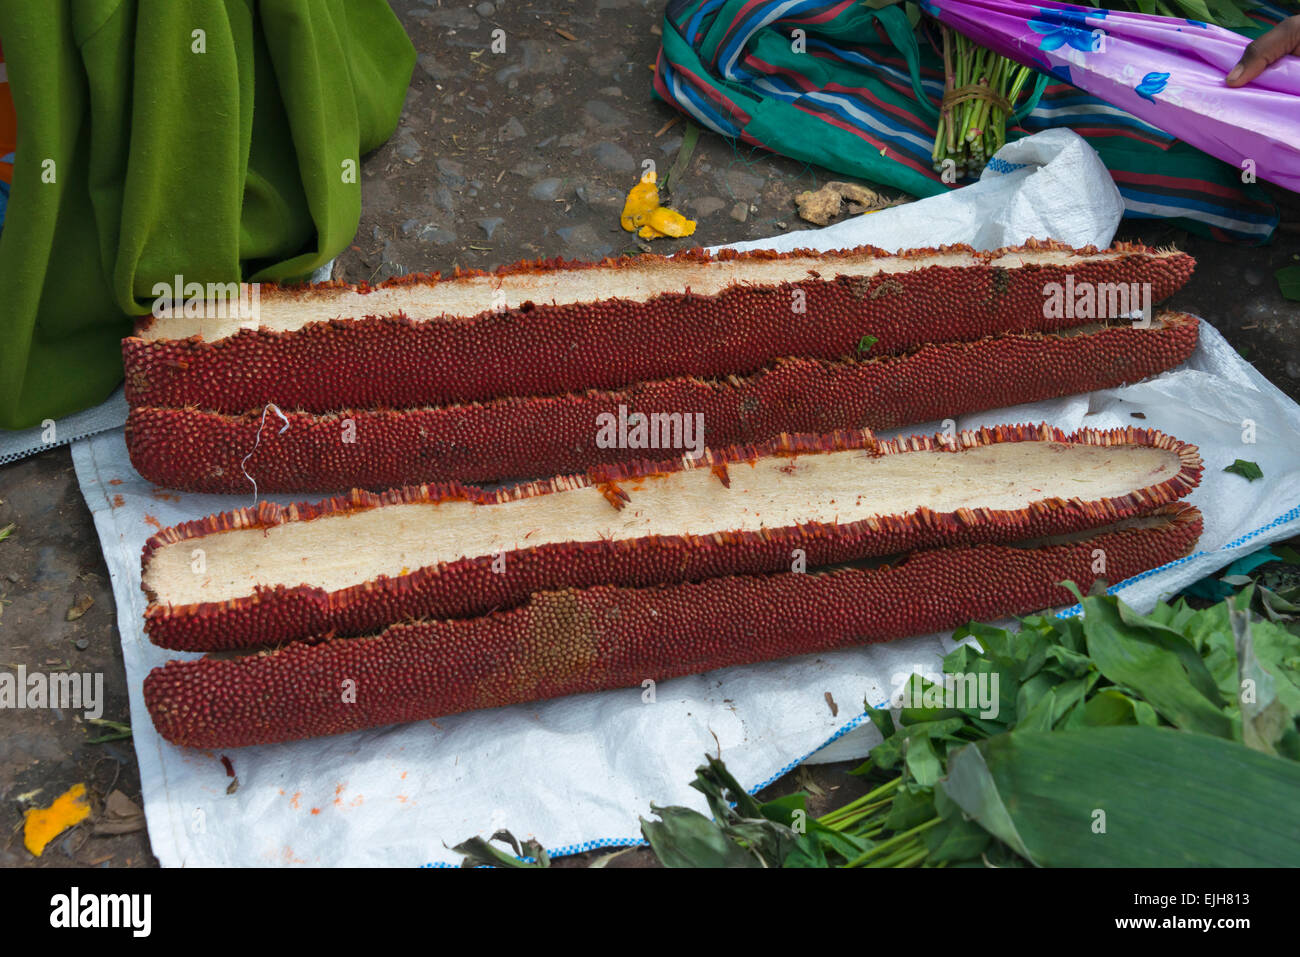 Tawi, also known as red fruit, at local market, Wamena, Papua, Indonesia Stock Photo